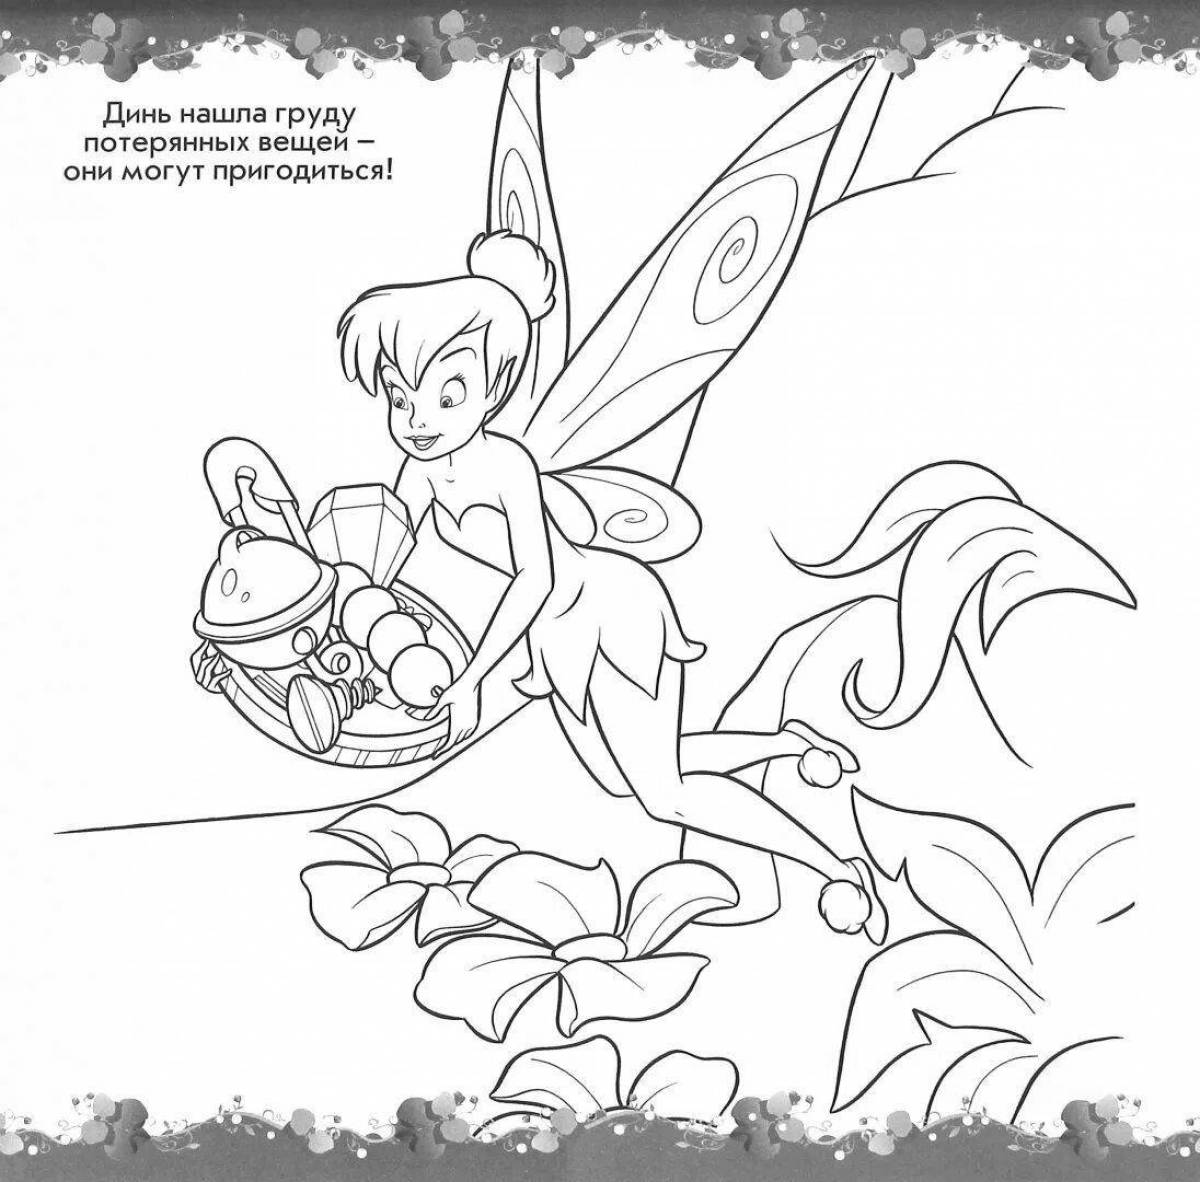 Disney fairy live coloring with stickers